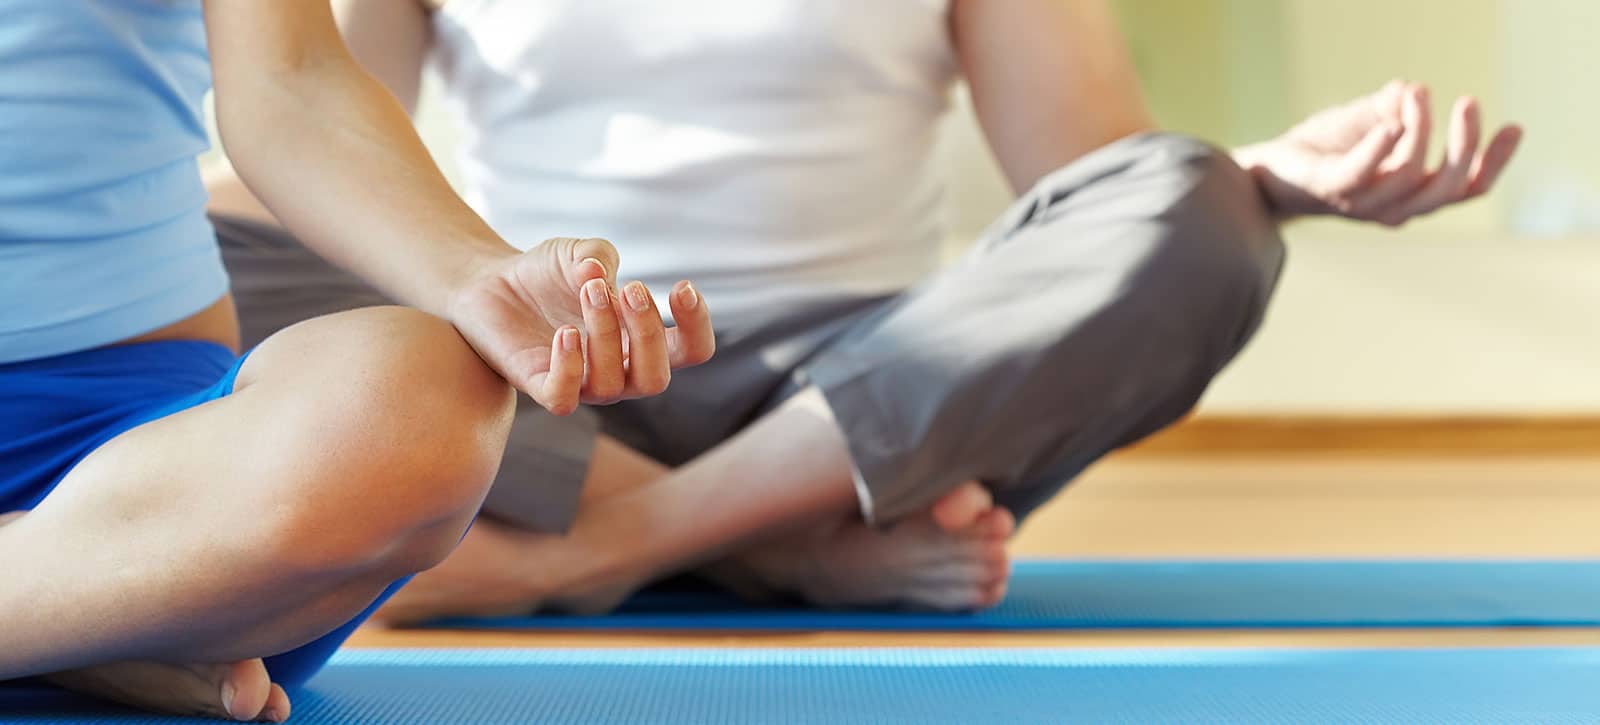 Image of a person with their legs crossed on a yoga mat on PSA Financial's website